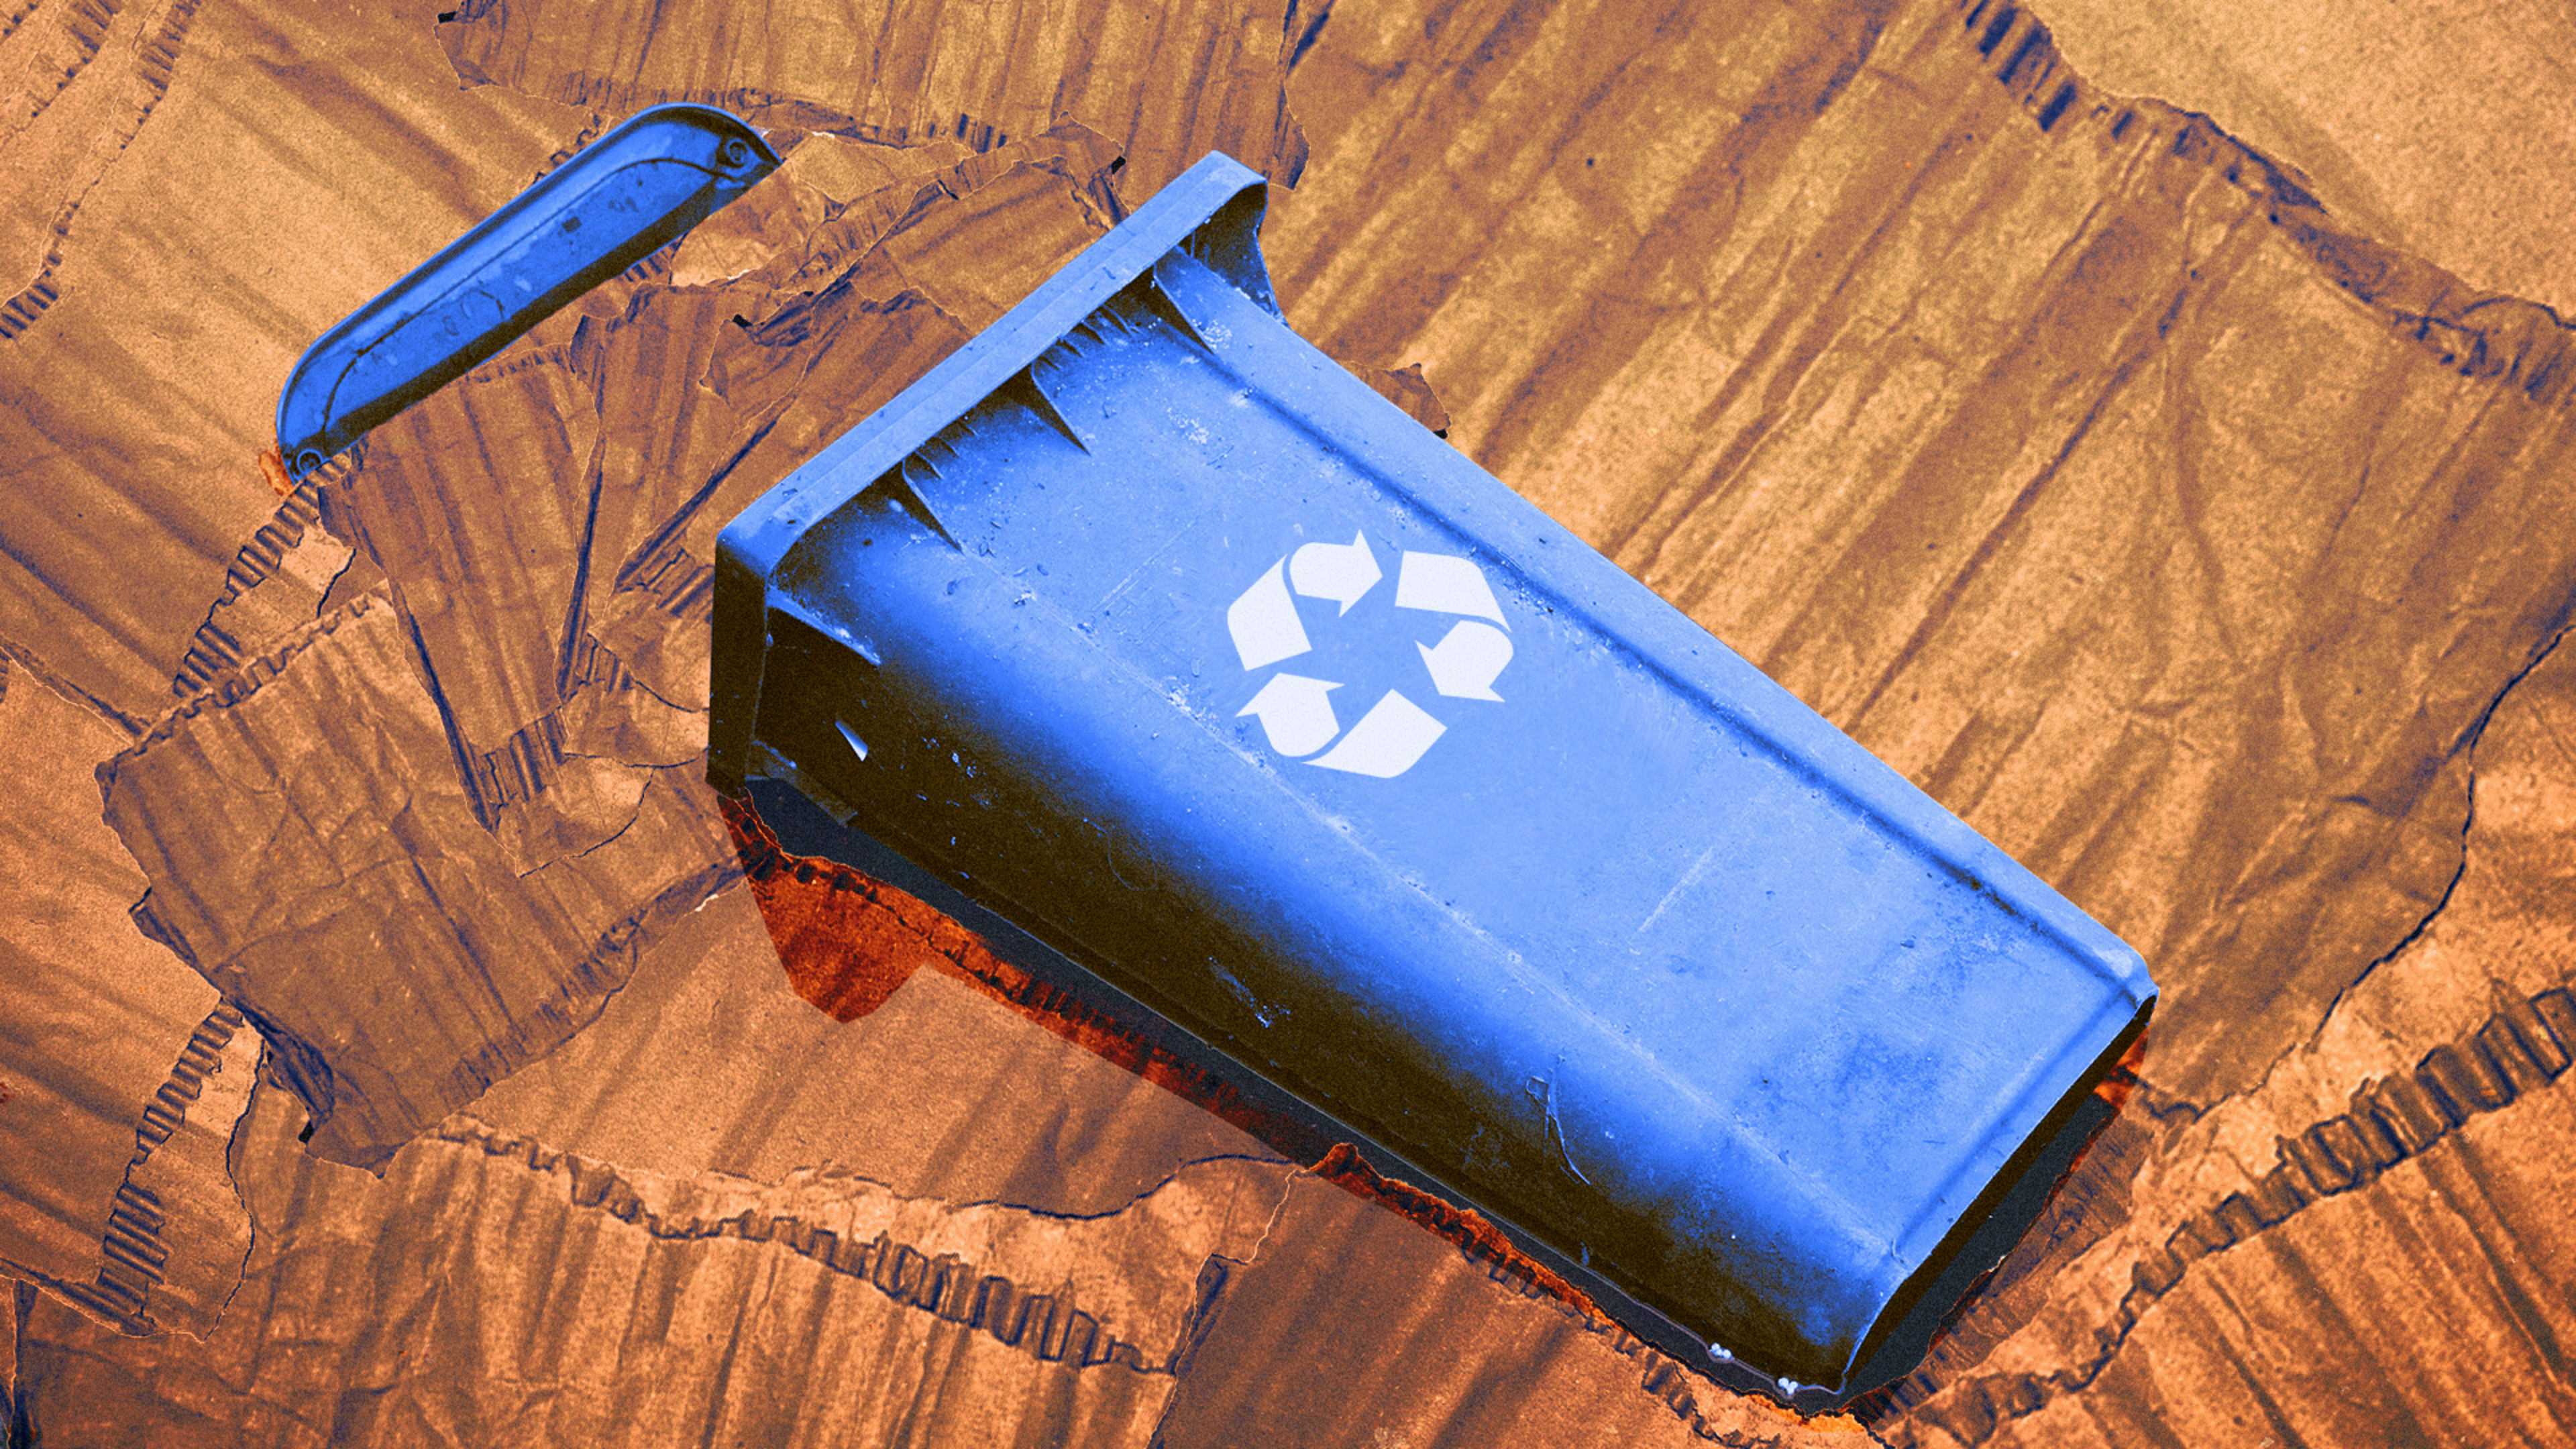 All the ways recycling is broken—and how to fix them